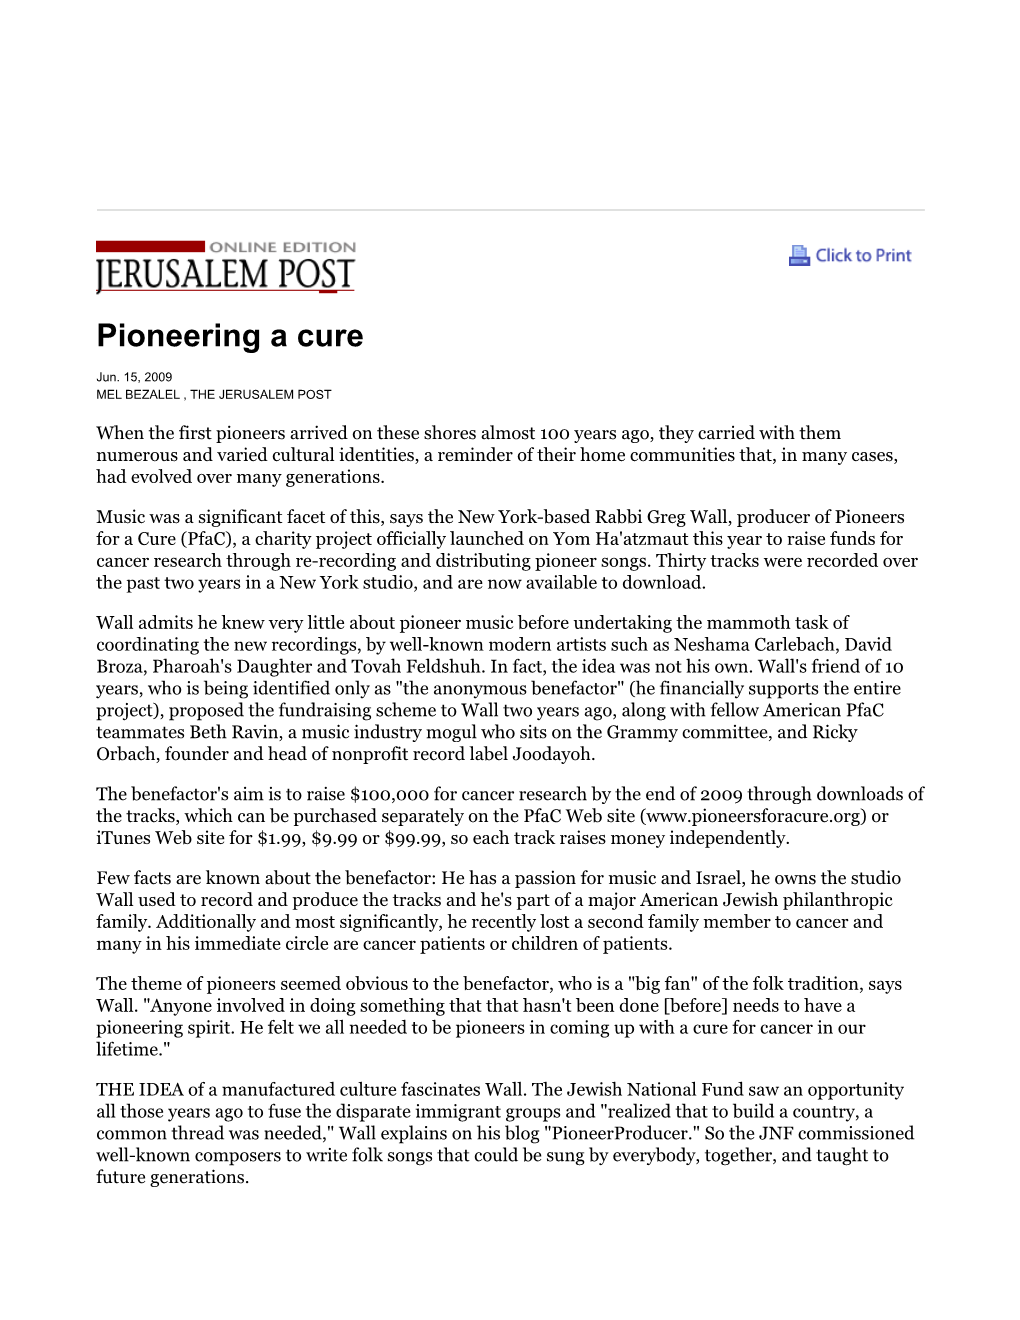 Pioneering a Cure